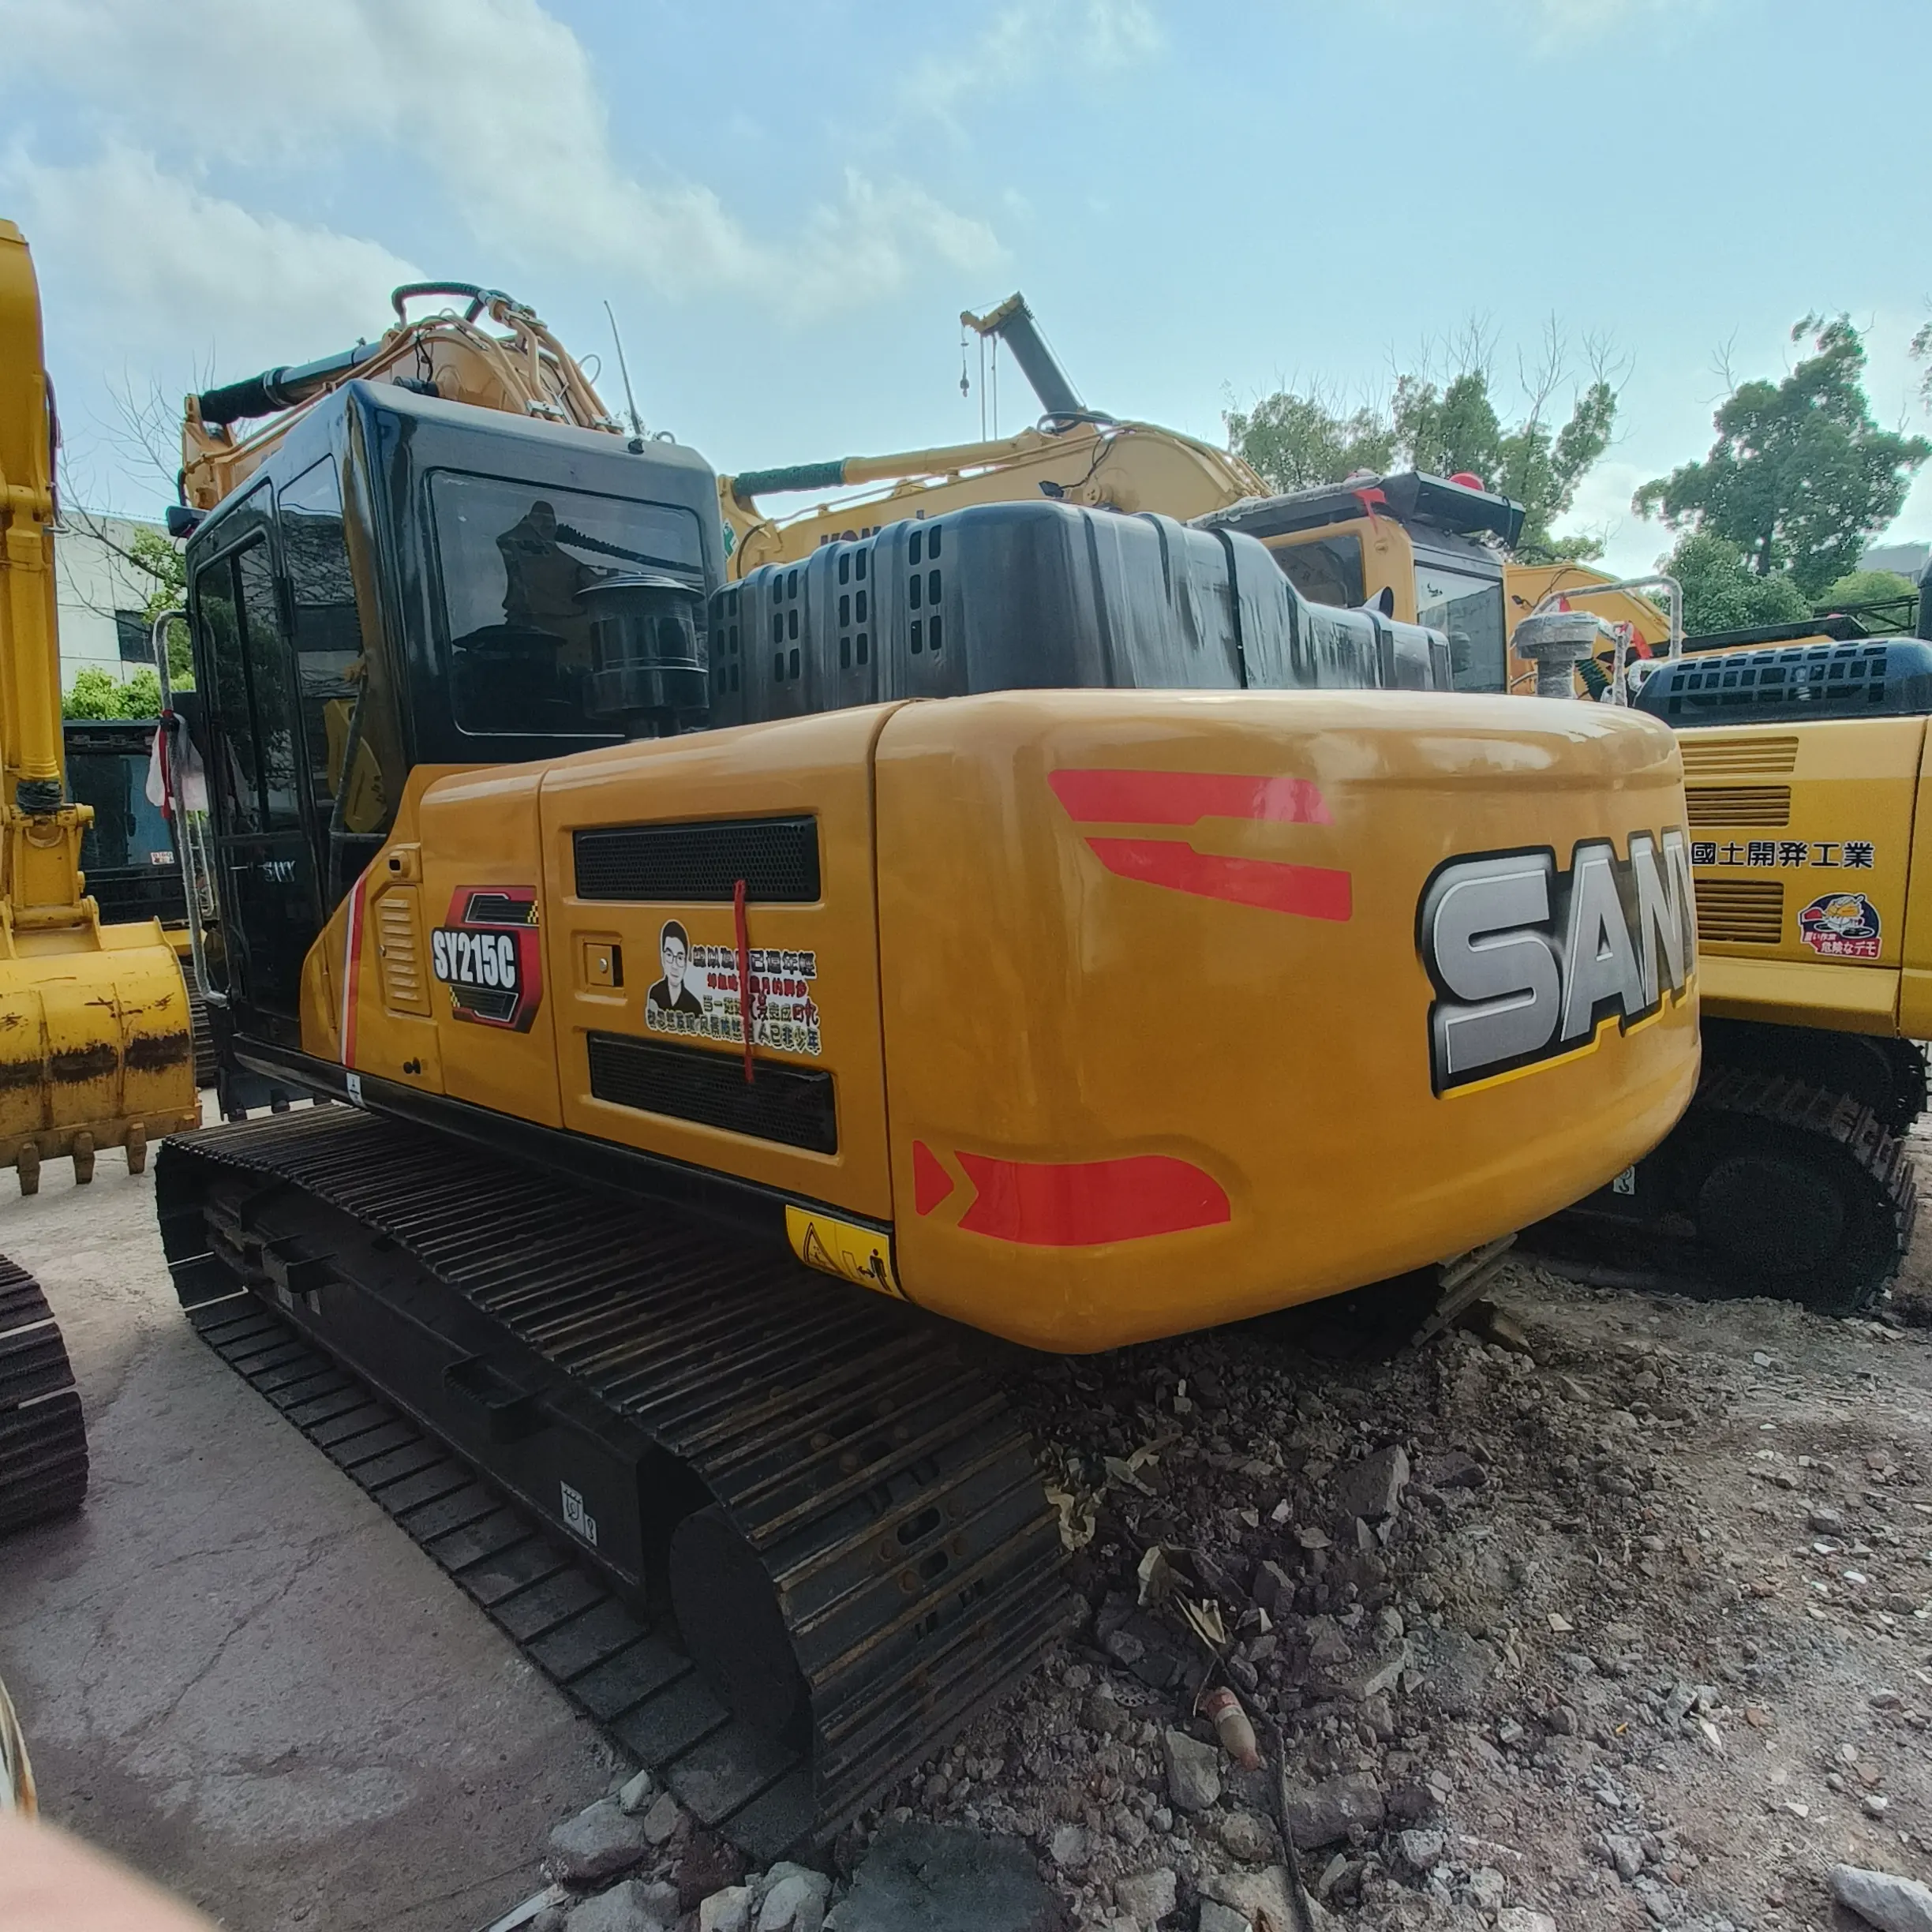 Hot selling heavy 22 ton machinery equipment low working hours used sany sy215cpro excavator in good condition